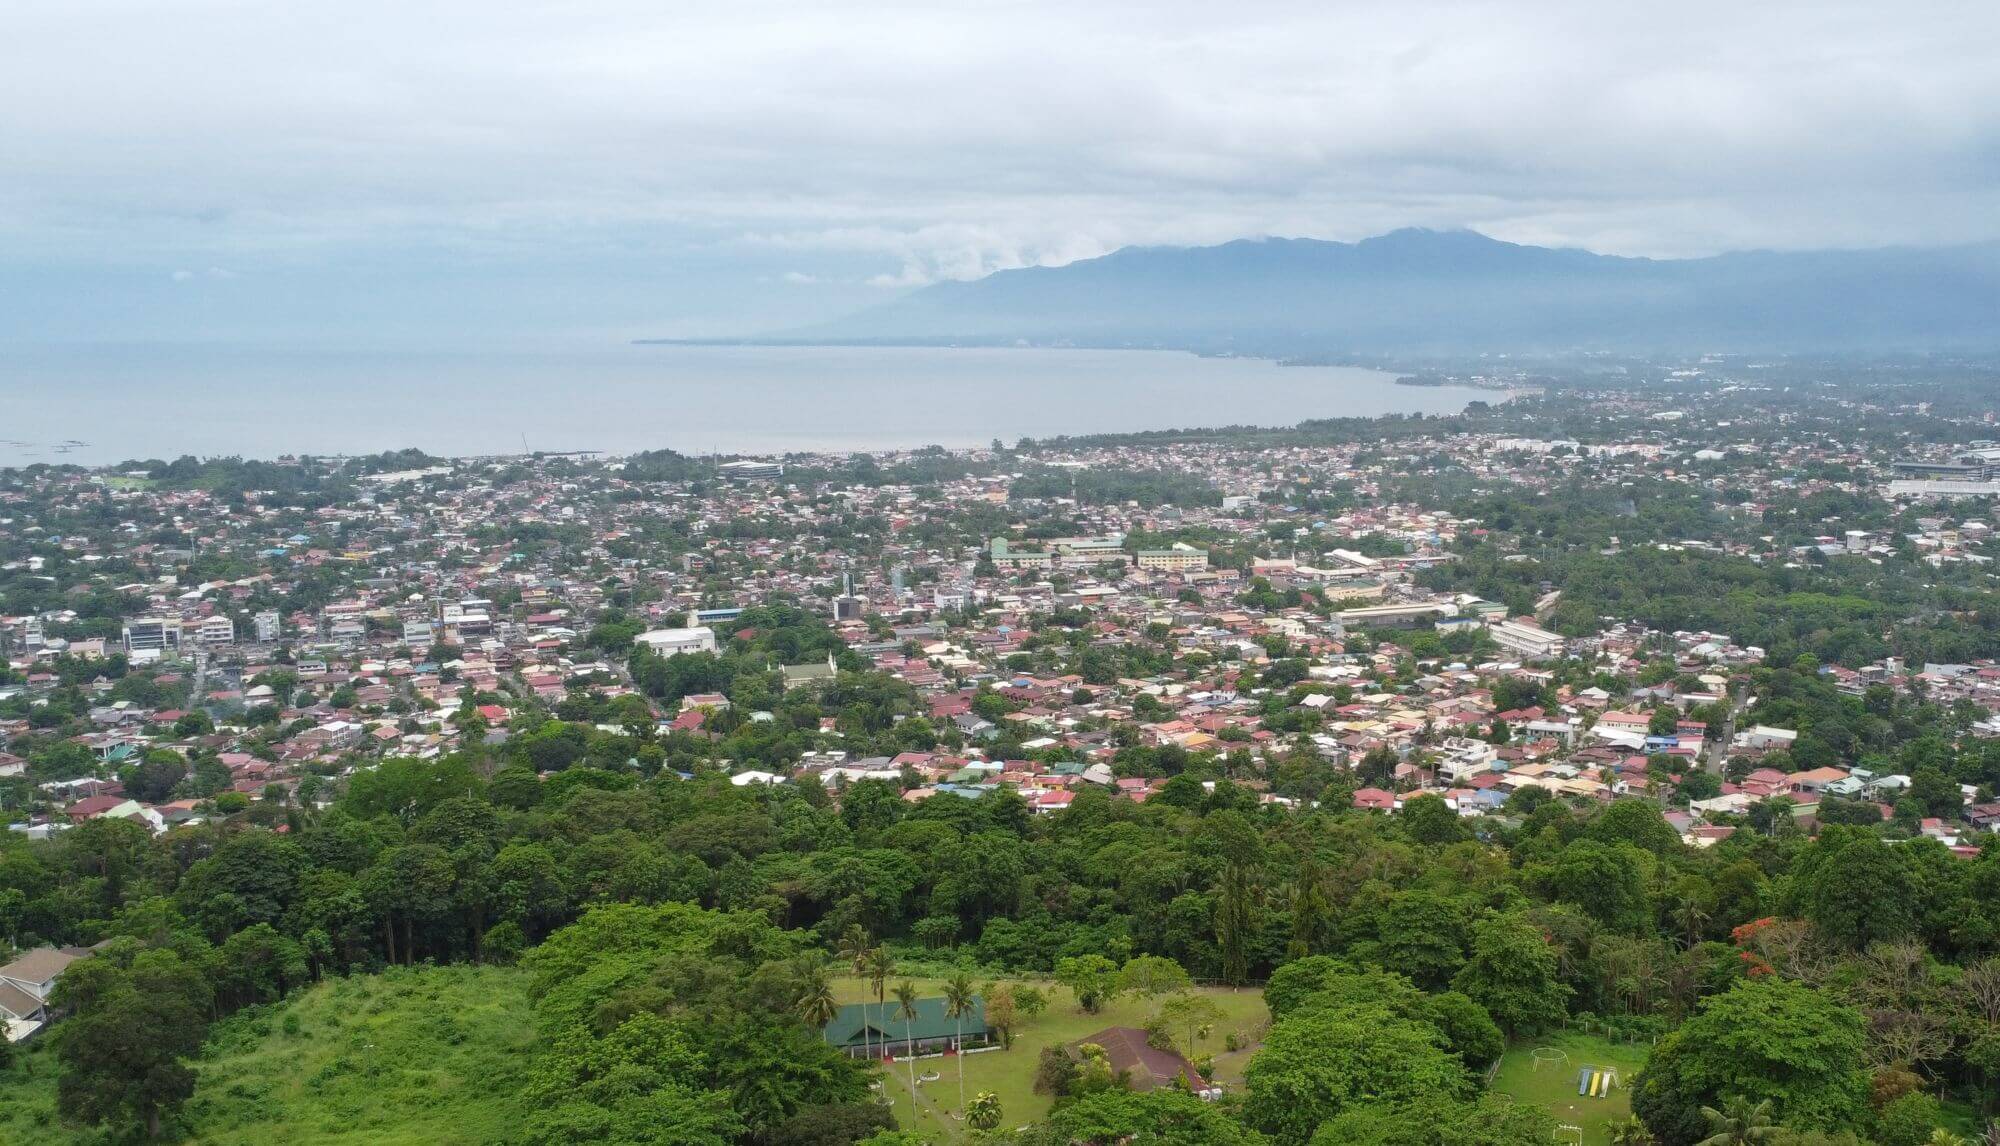 A city view from a hill - sprawling leafy streets among greenery and a beach in the background in Davao